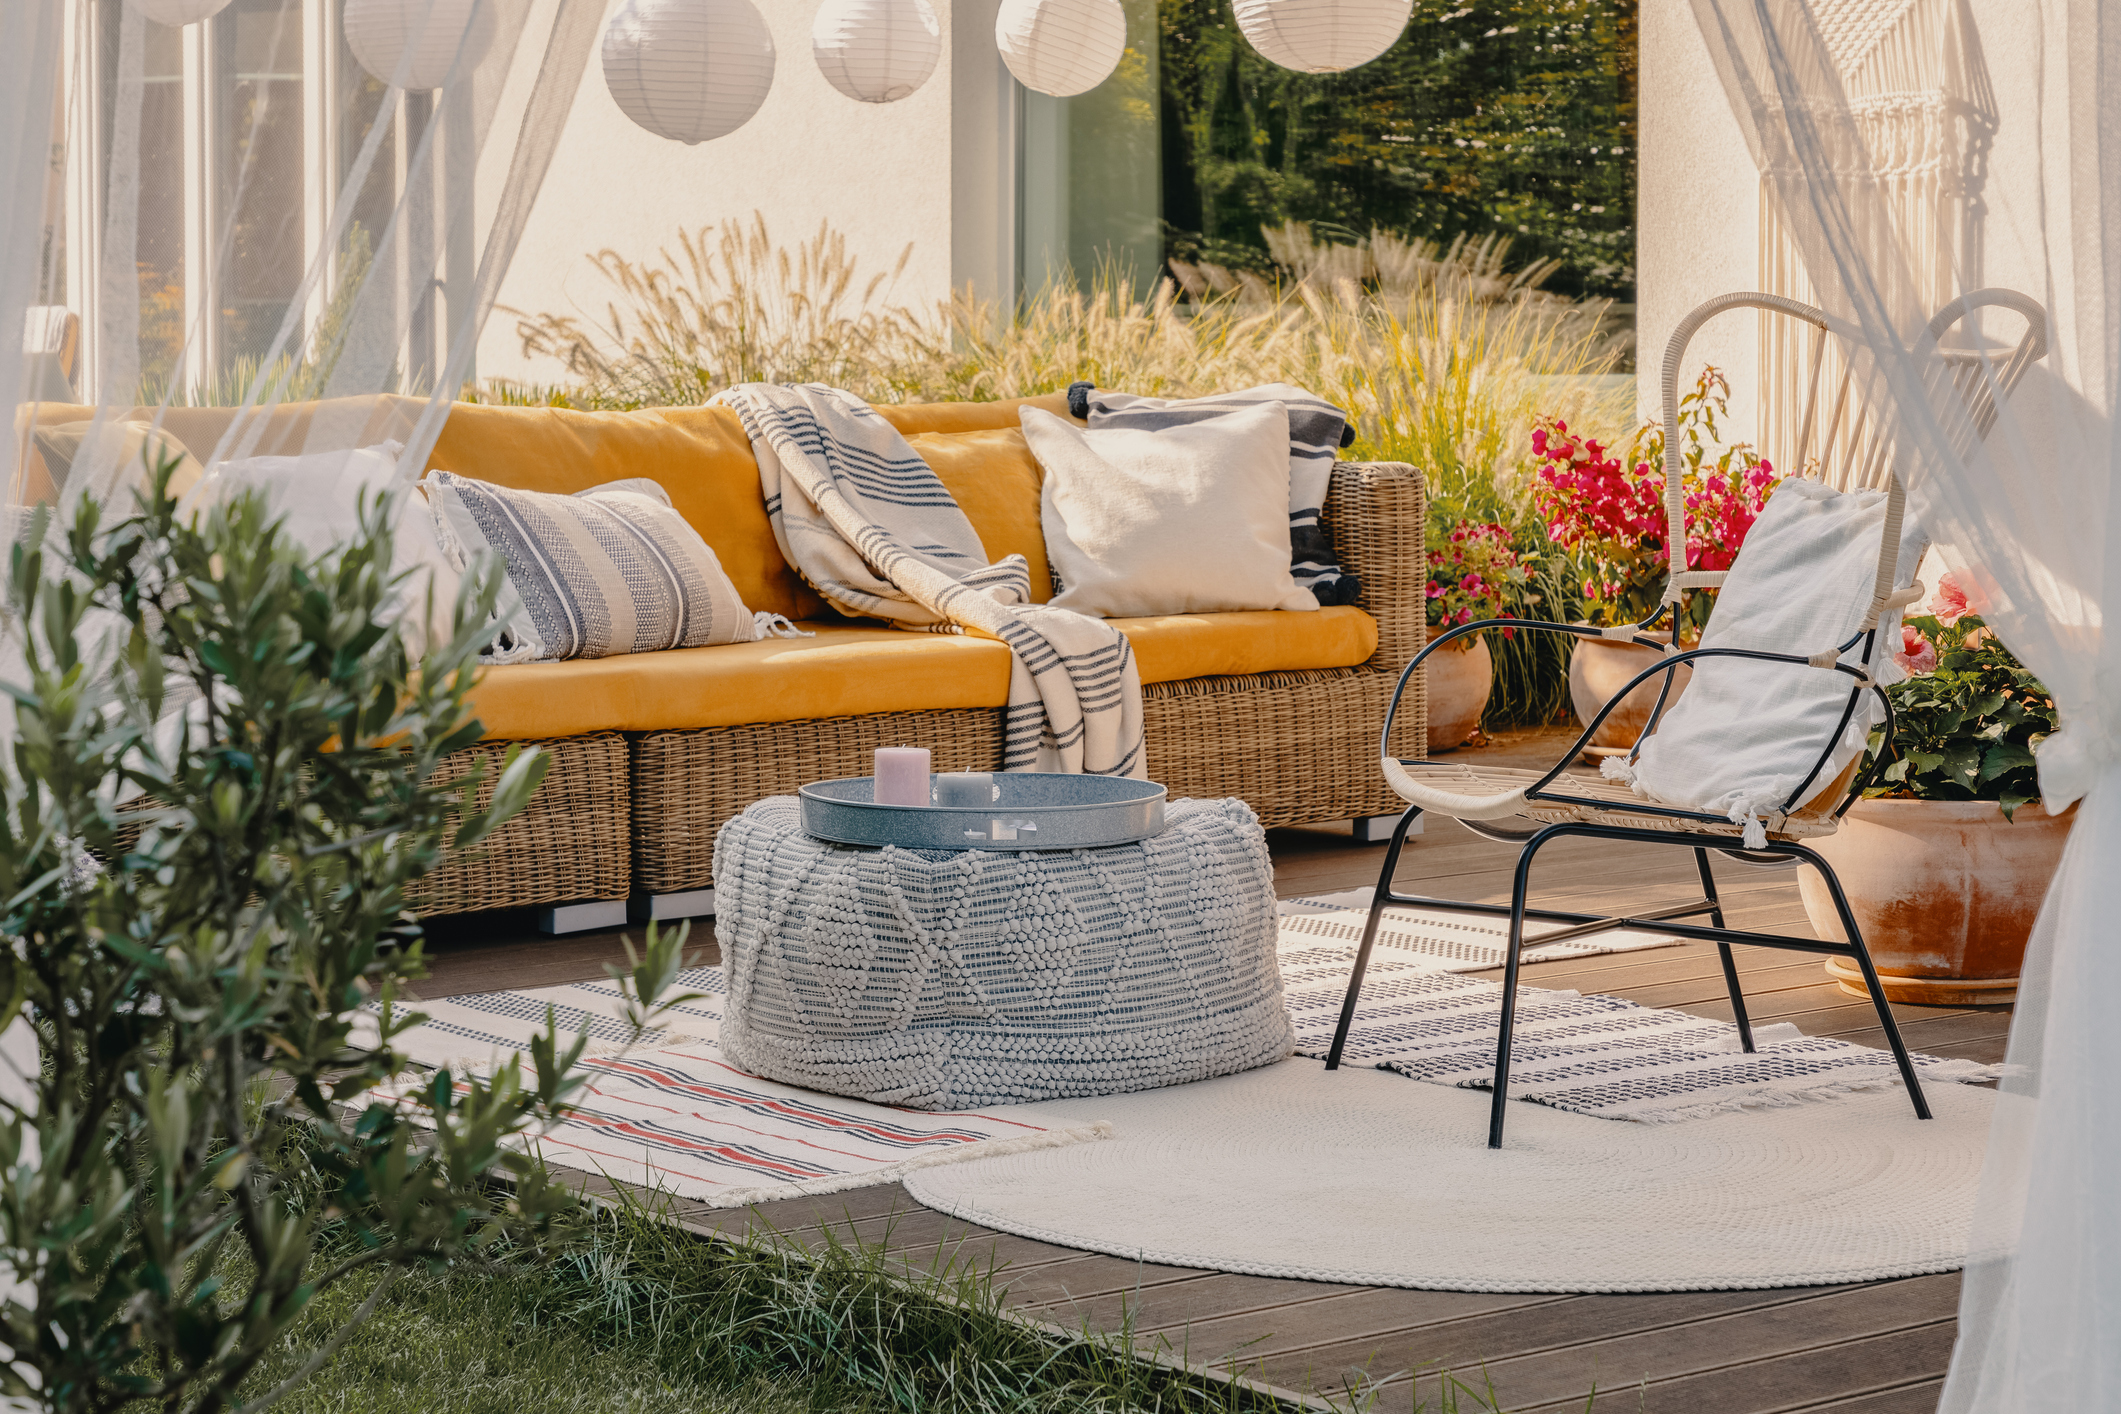 How To Store Patio Cushions Safely During the Winter Season